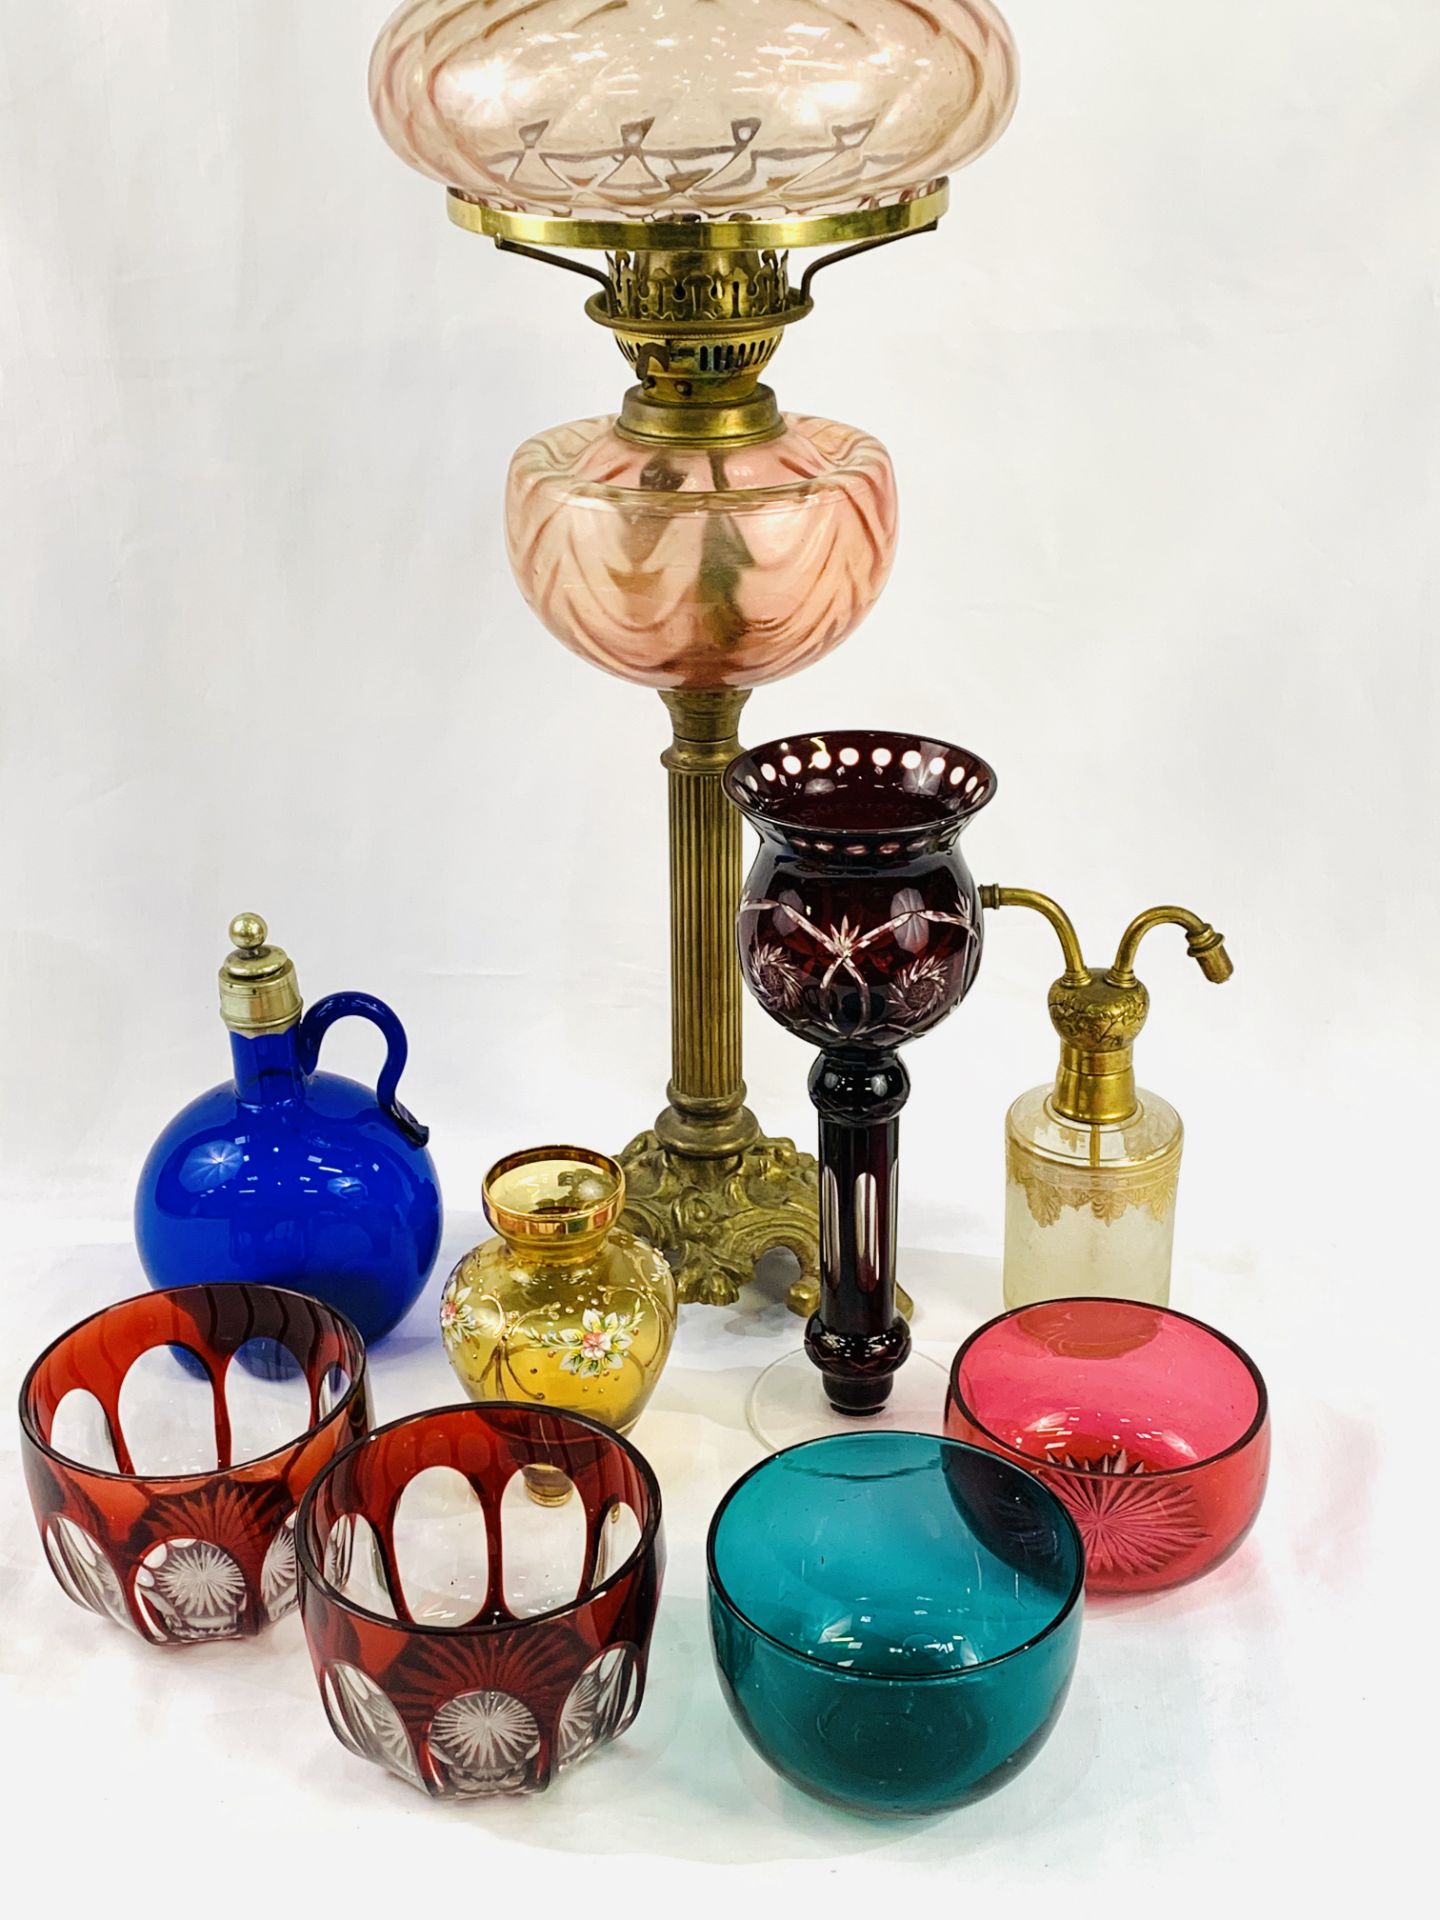 Brass oil lamp with pale pink shade; pair of ruby cut bowls and a glass; and other glass ware - Image 2 of 4